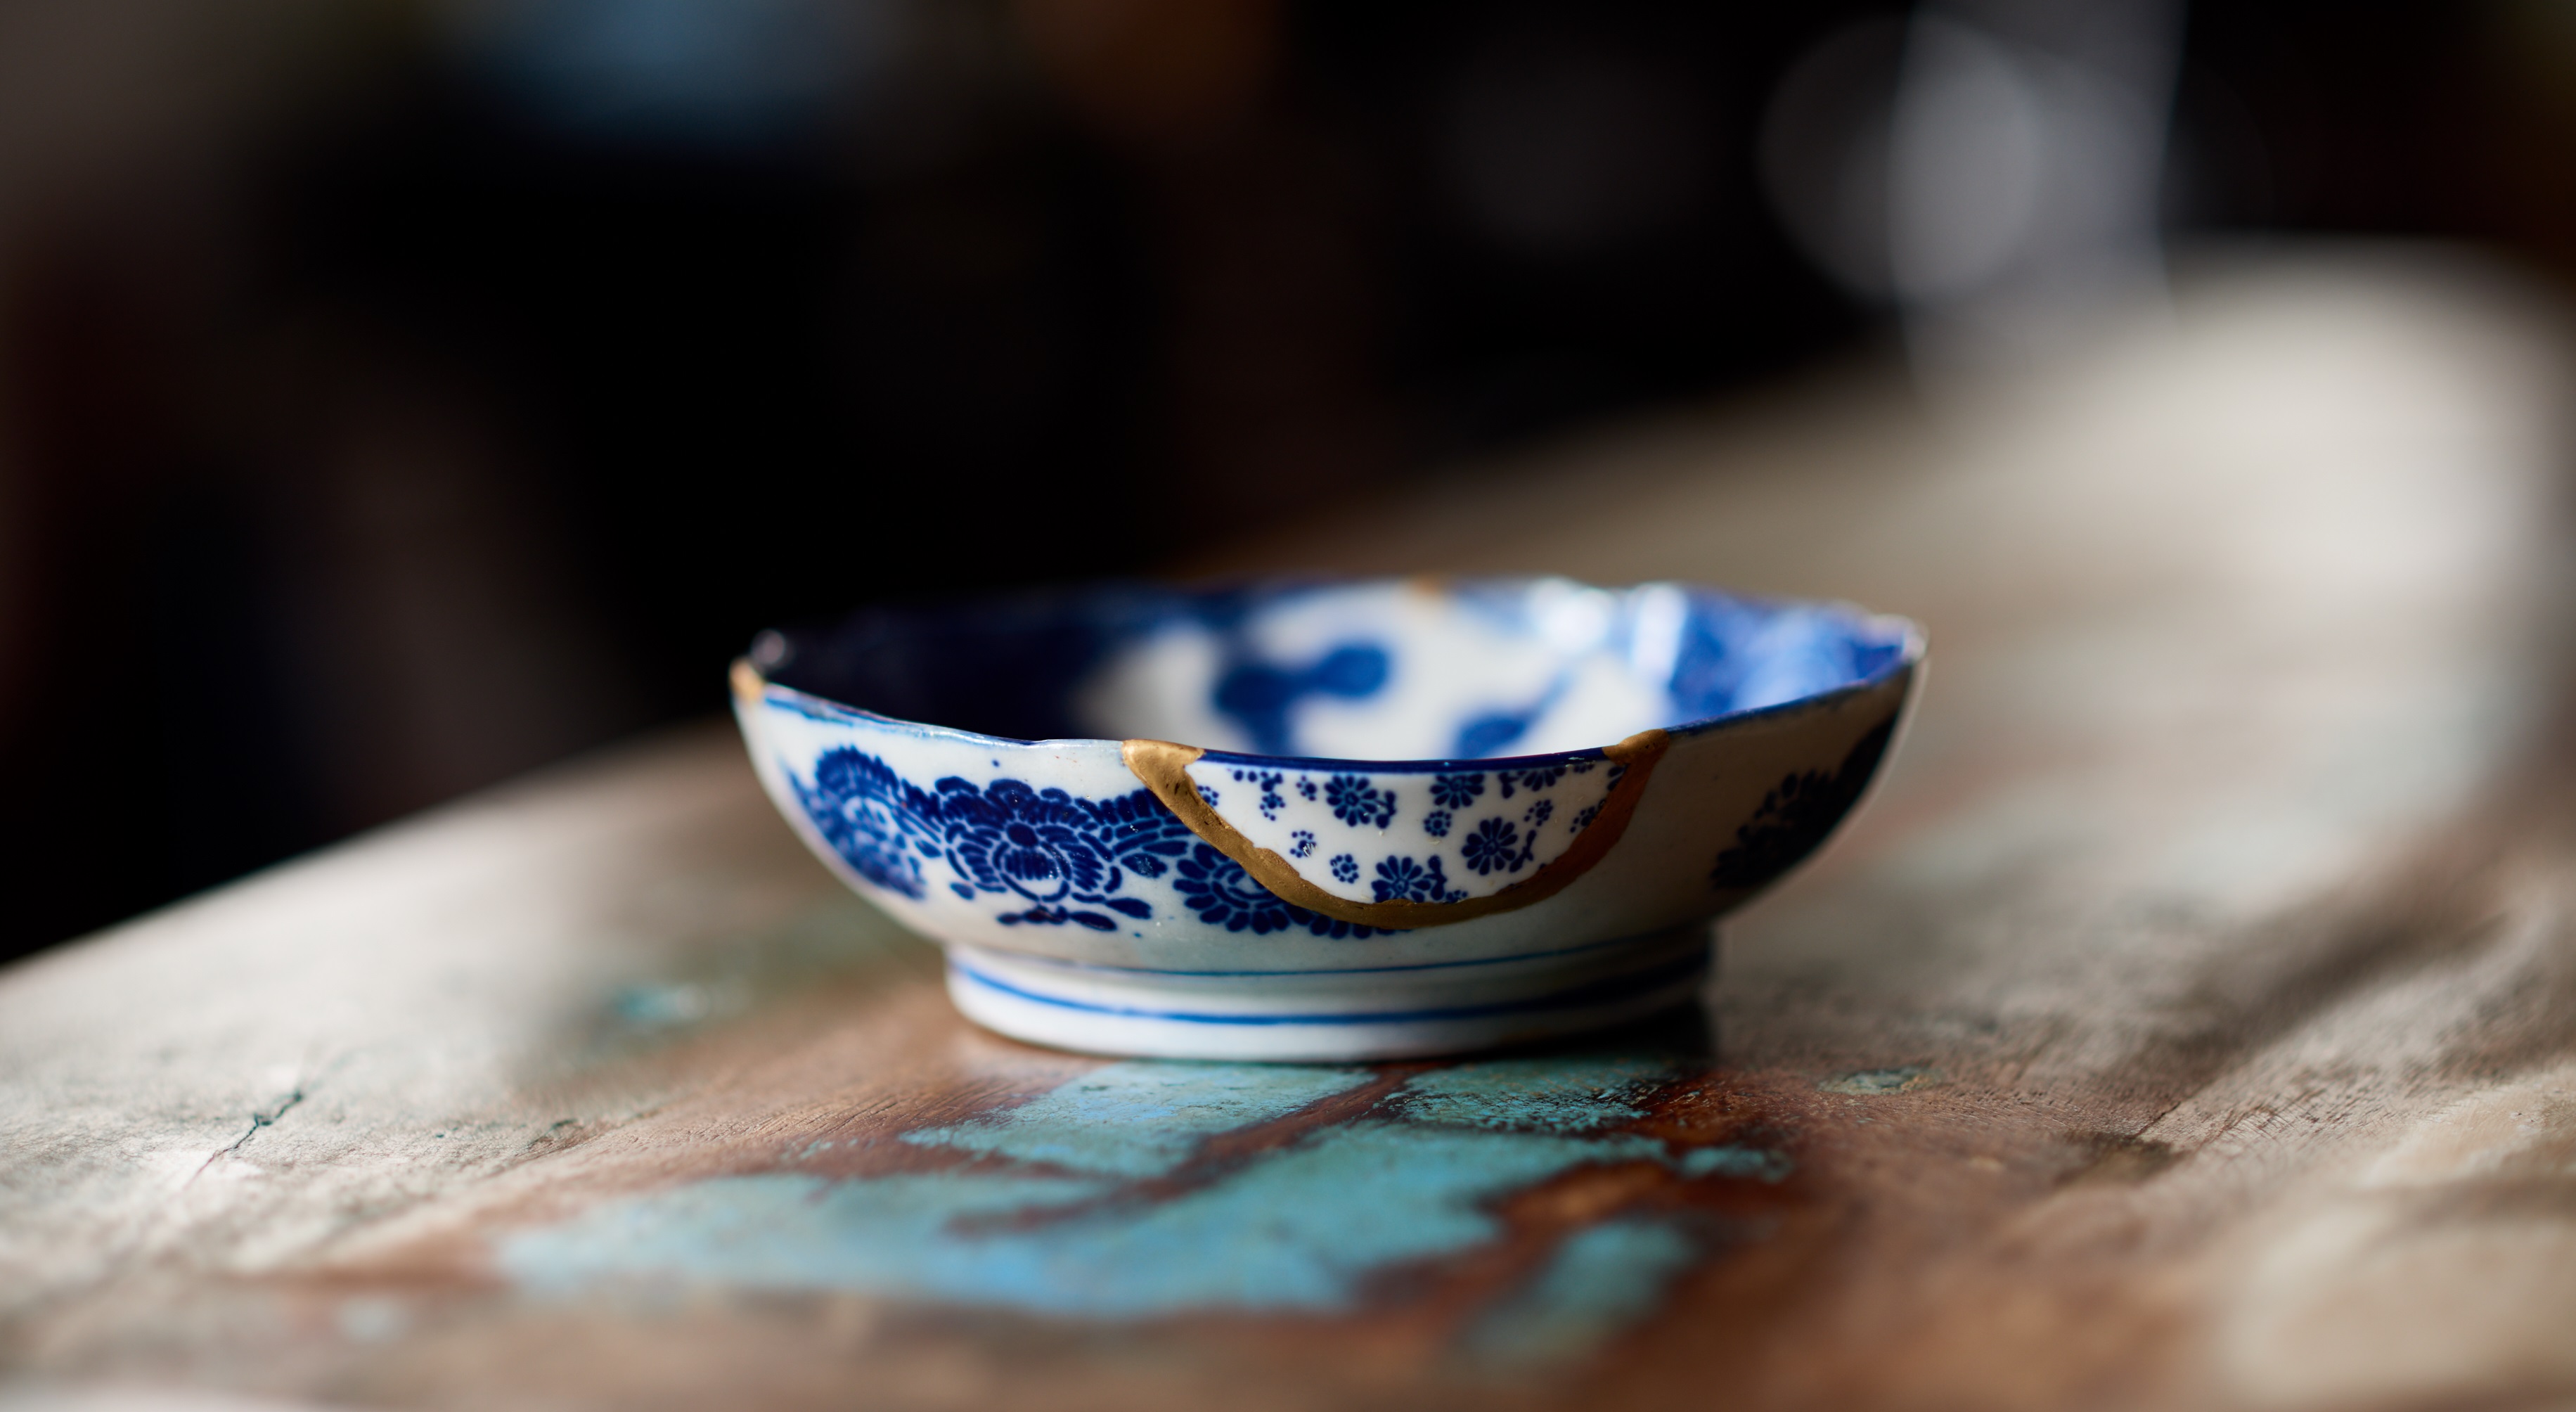 Plate mended with kintsugi technique